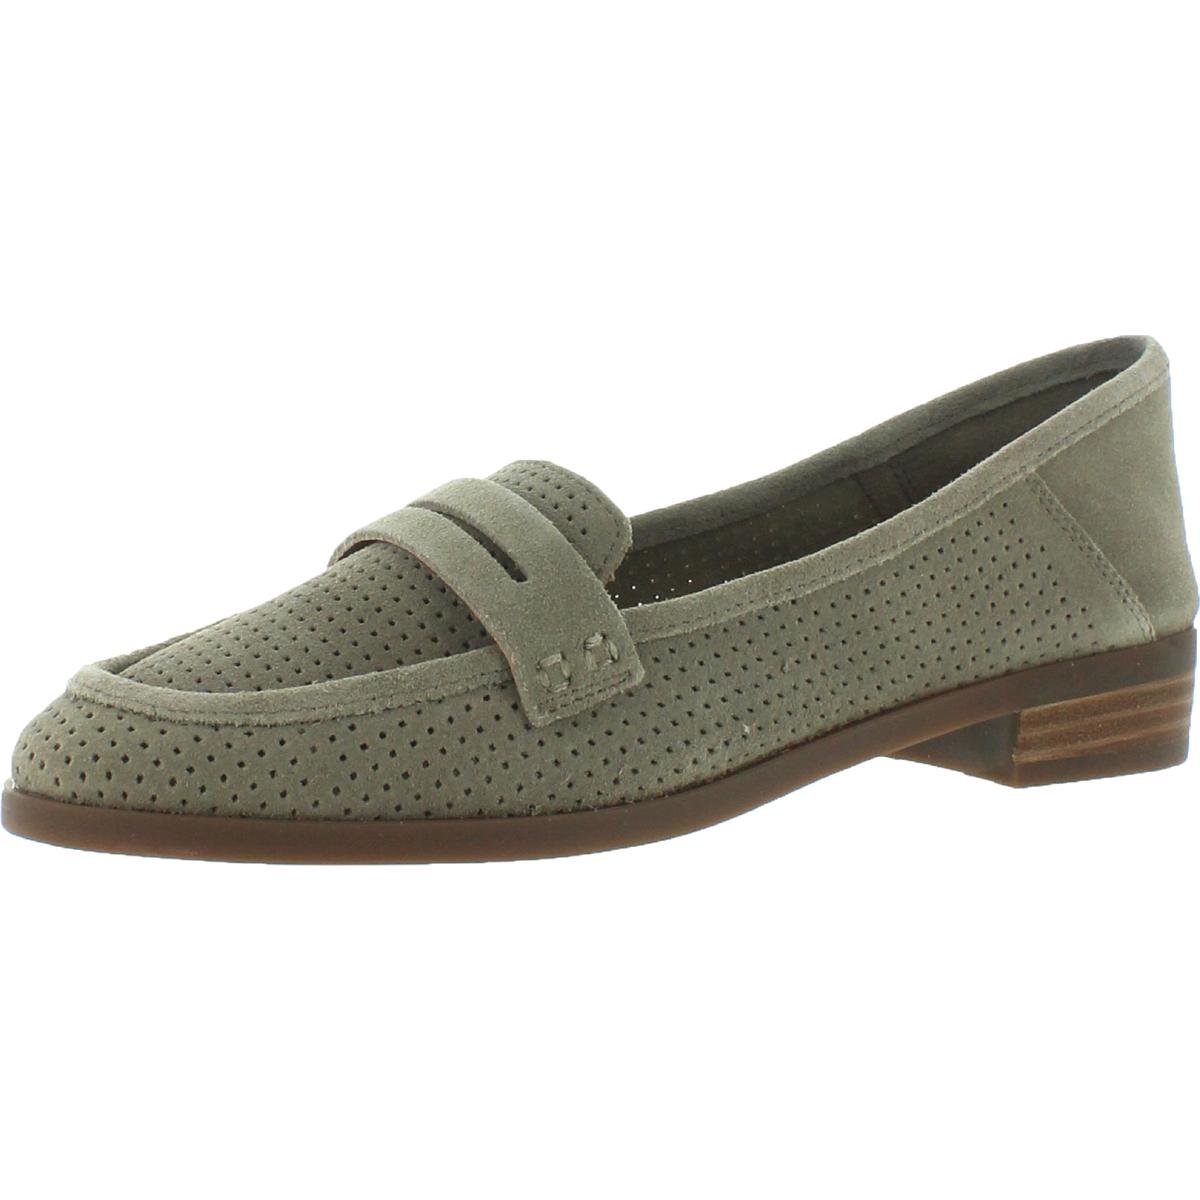 Lucky Brand Womens Caylonp Suede Perforated Slip On Loafers Shoes BHFO ...